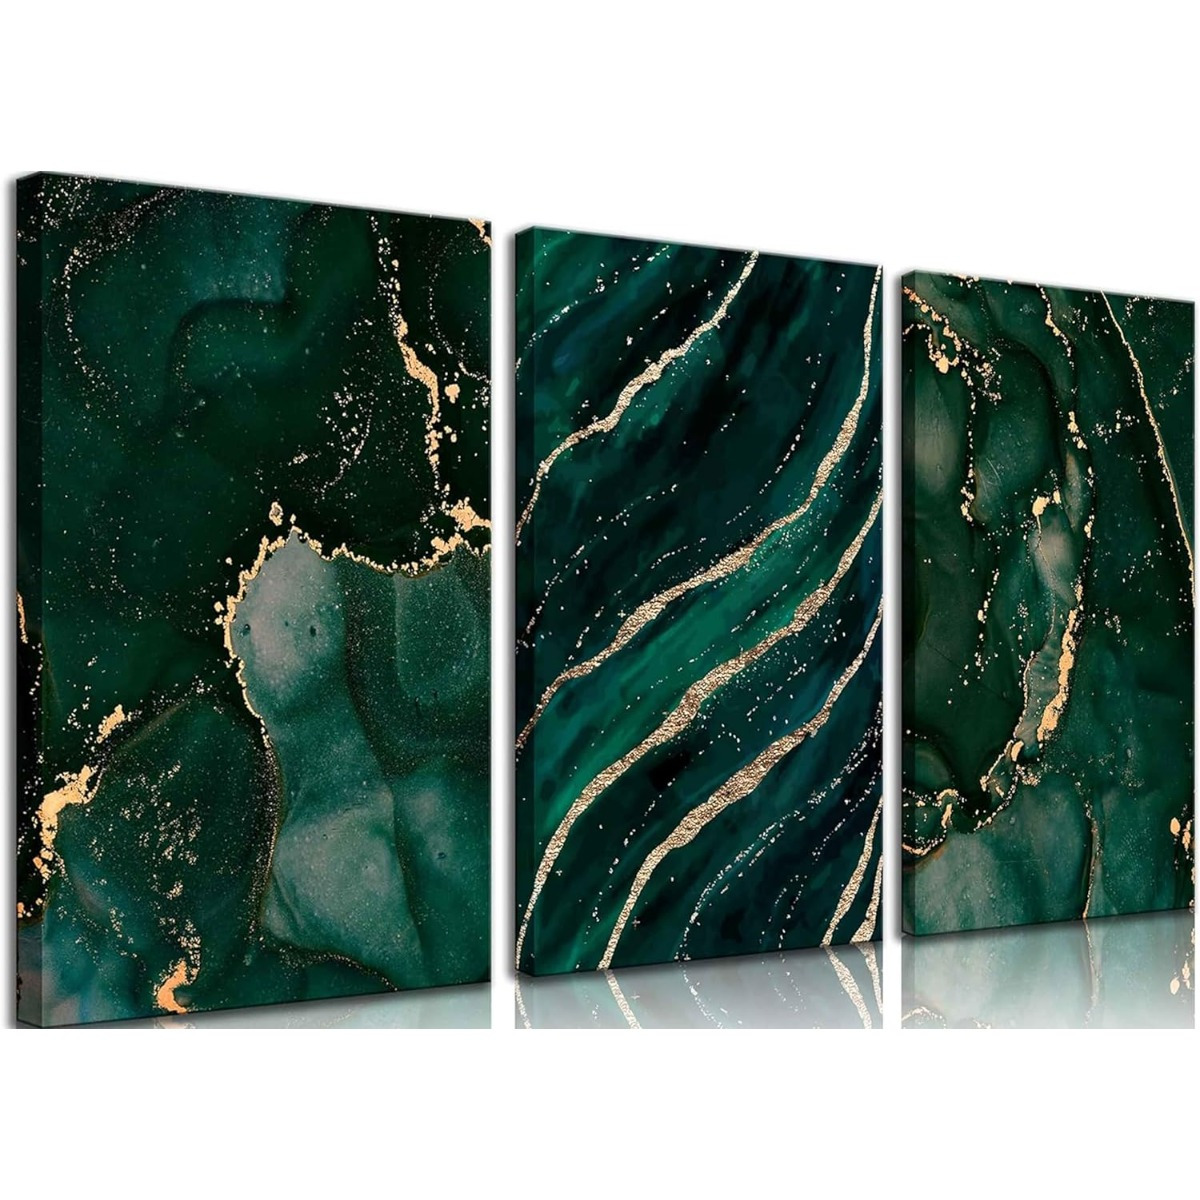 

Wall Art, 3pcs Abstract Emerald Green Marble Wall Hanging Decor, Framed Canvas Prints, Modern Art For Living Room, Bedroom, Office Decoration